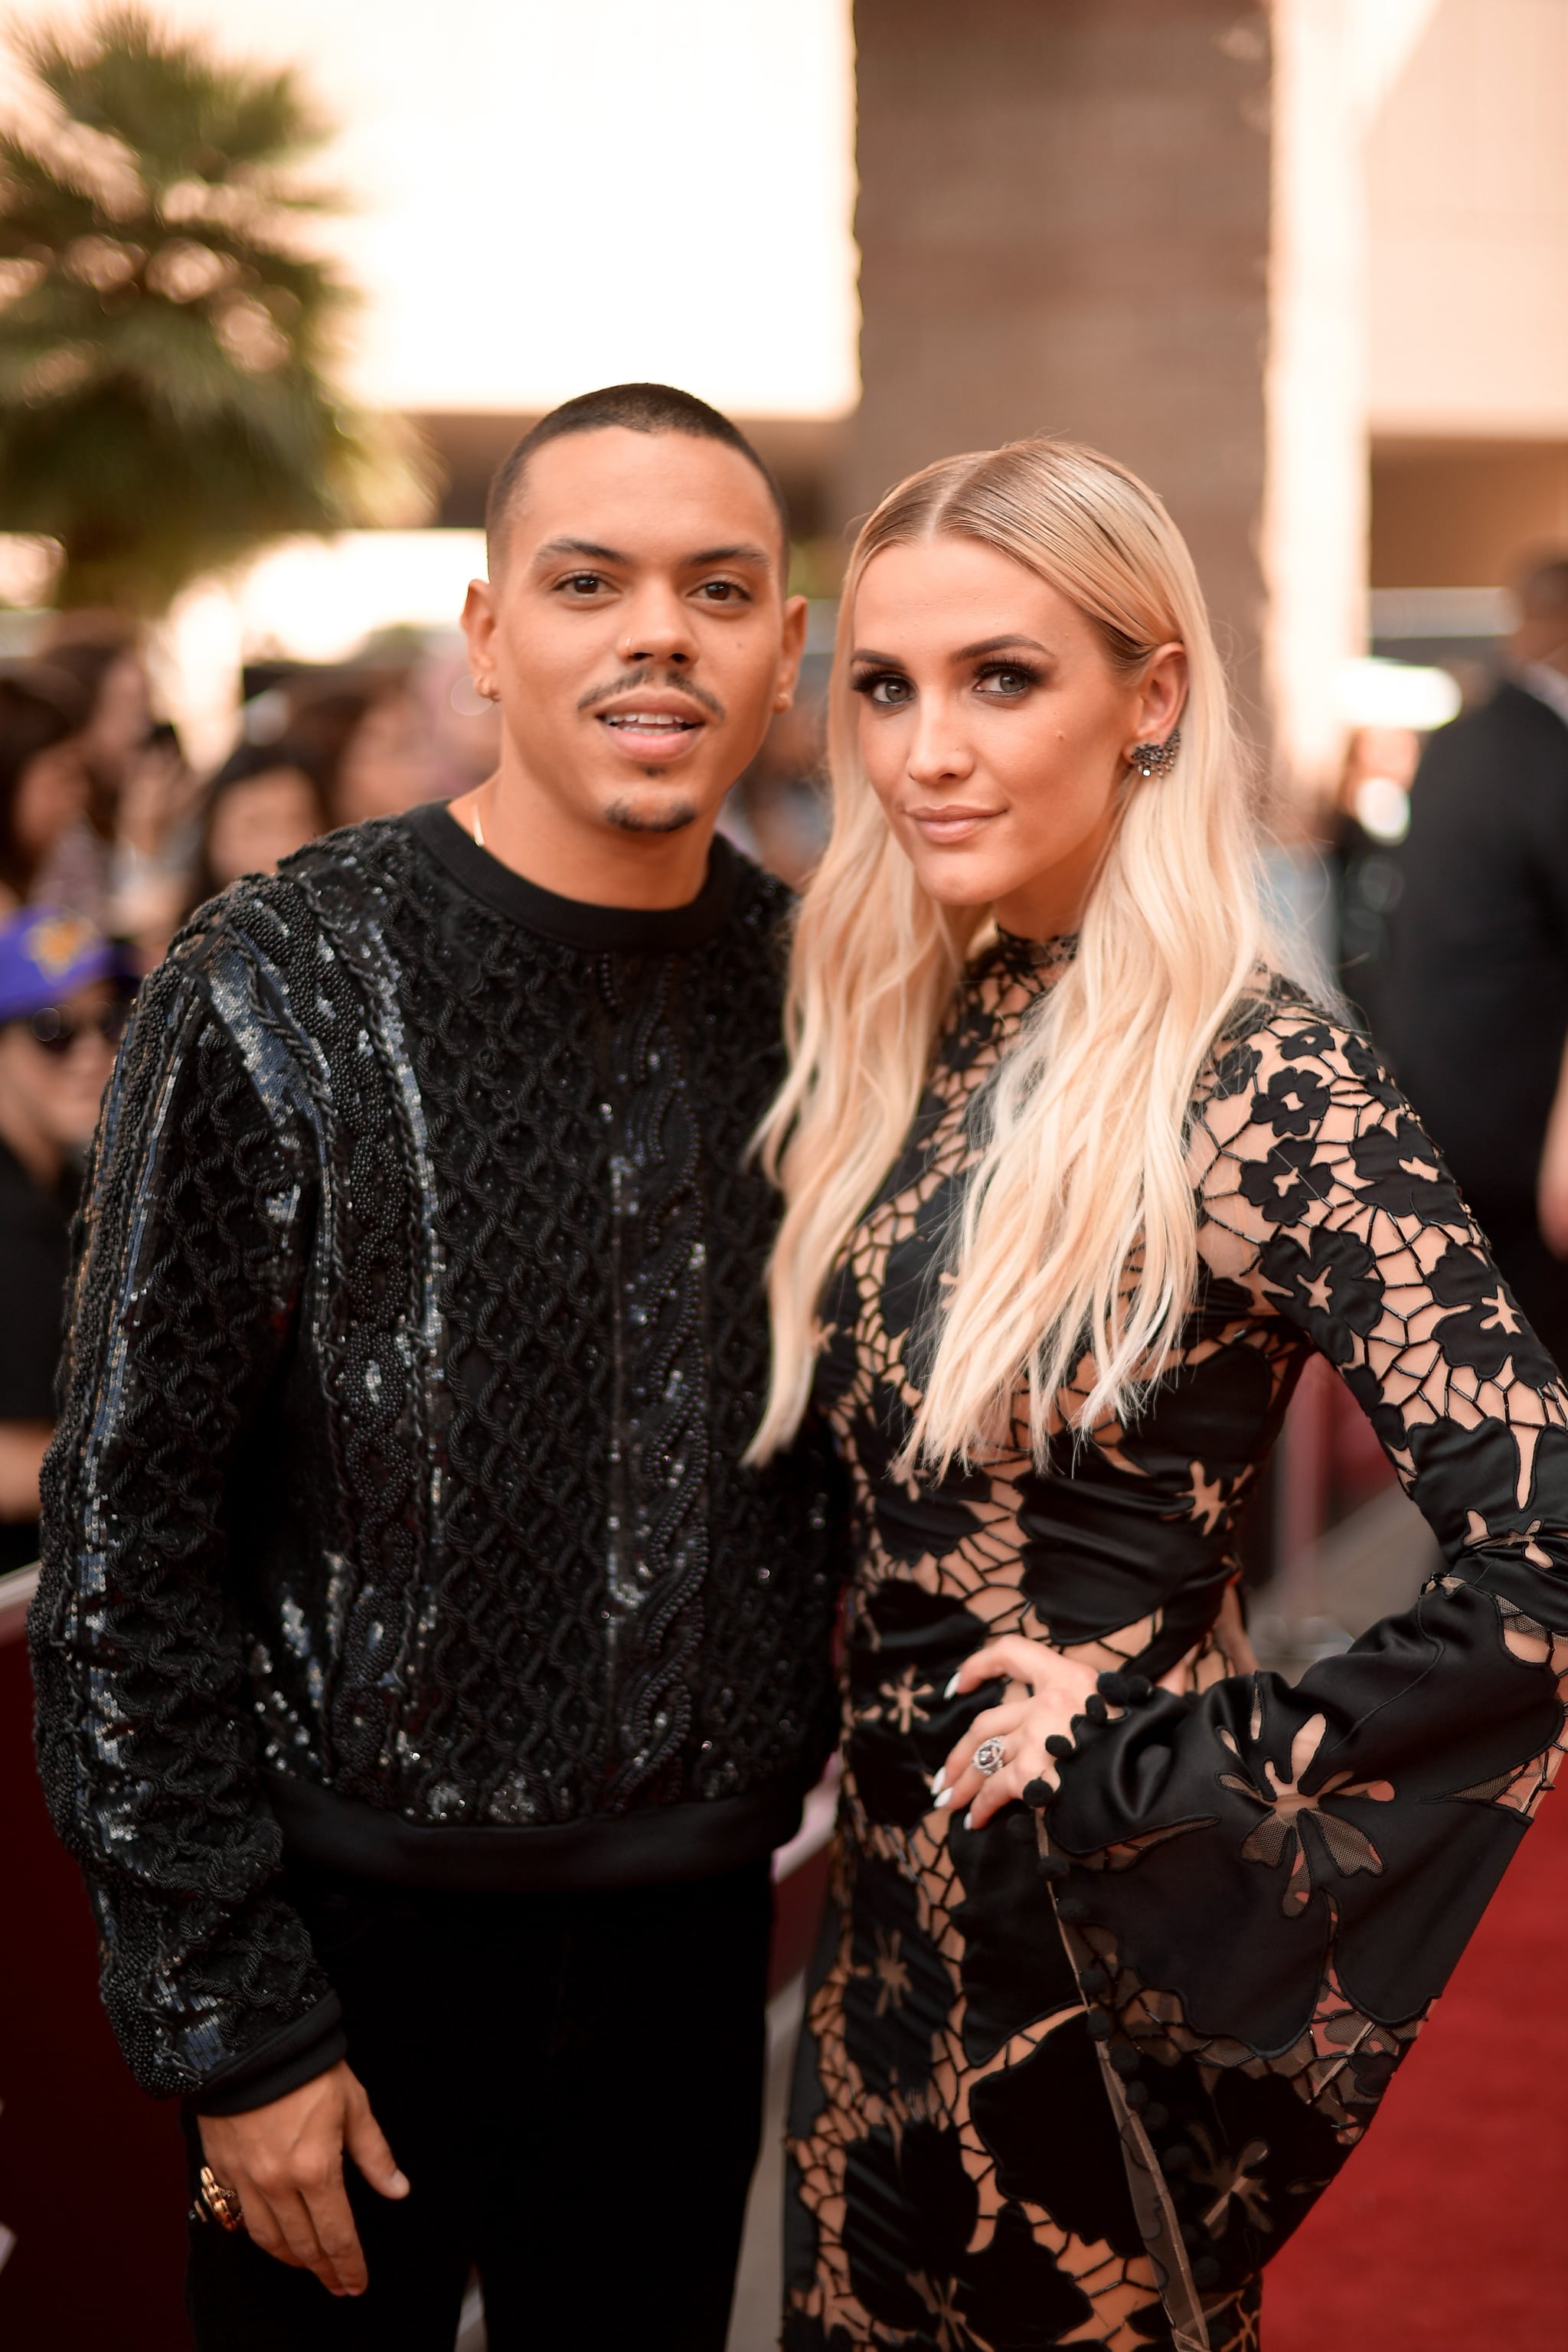 LAS VEGAS, NV - MAY 20:  Actor Evan Ross (L) and recording artist Ashlee Simpson attend the 2018 Billboard Music Awards at MGM Grand Garden Arena on May 20, 2018 in Las Vegas, Nevada.  (Photo by Matt Winkelmeyer/Getty Images for dcp)